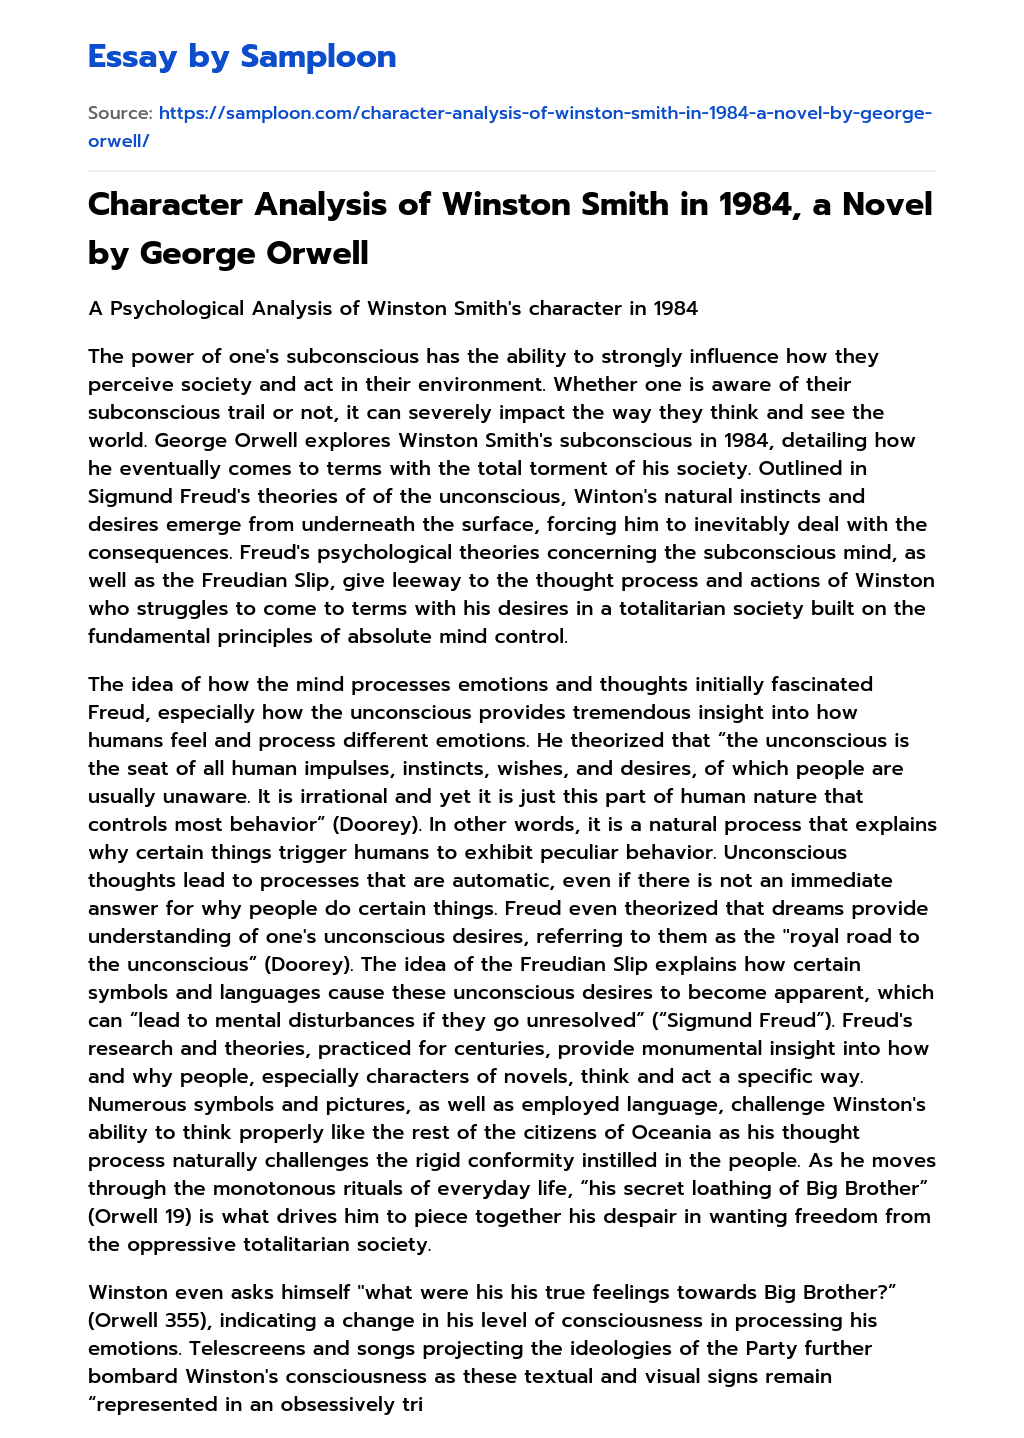 Character Analysis of Winston Smith in 1984, a Novel by George Orwell essay